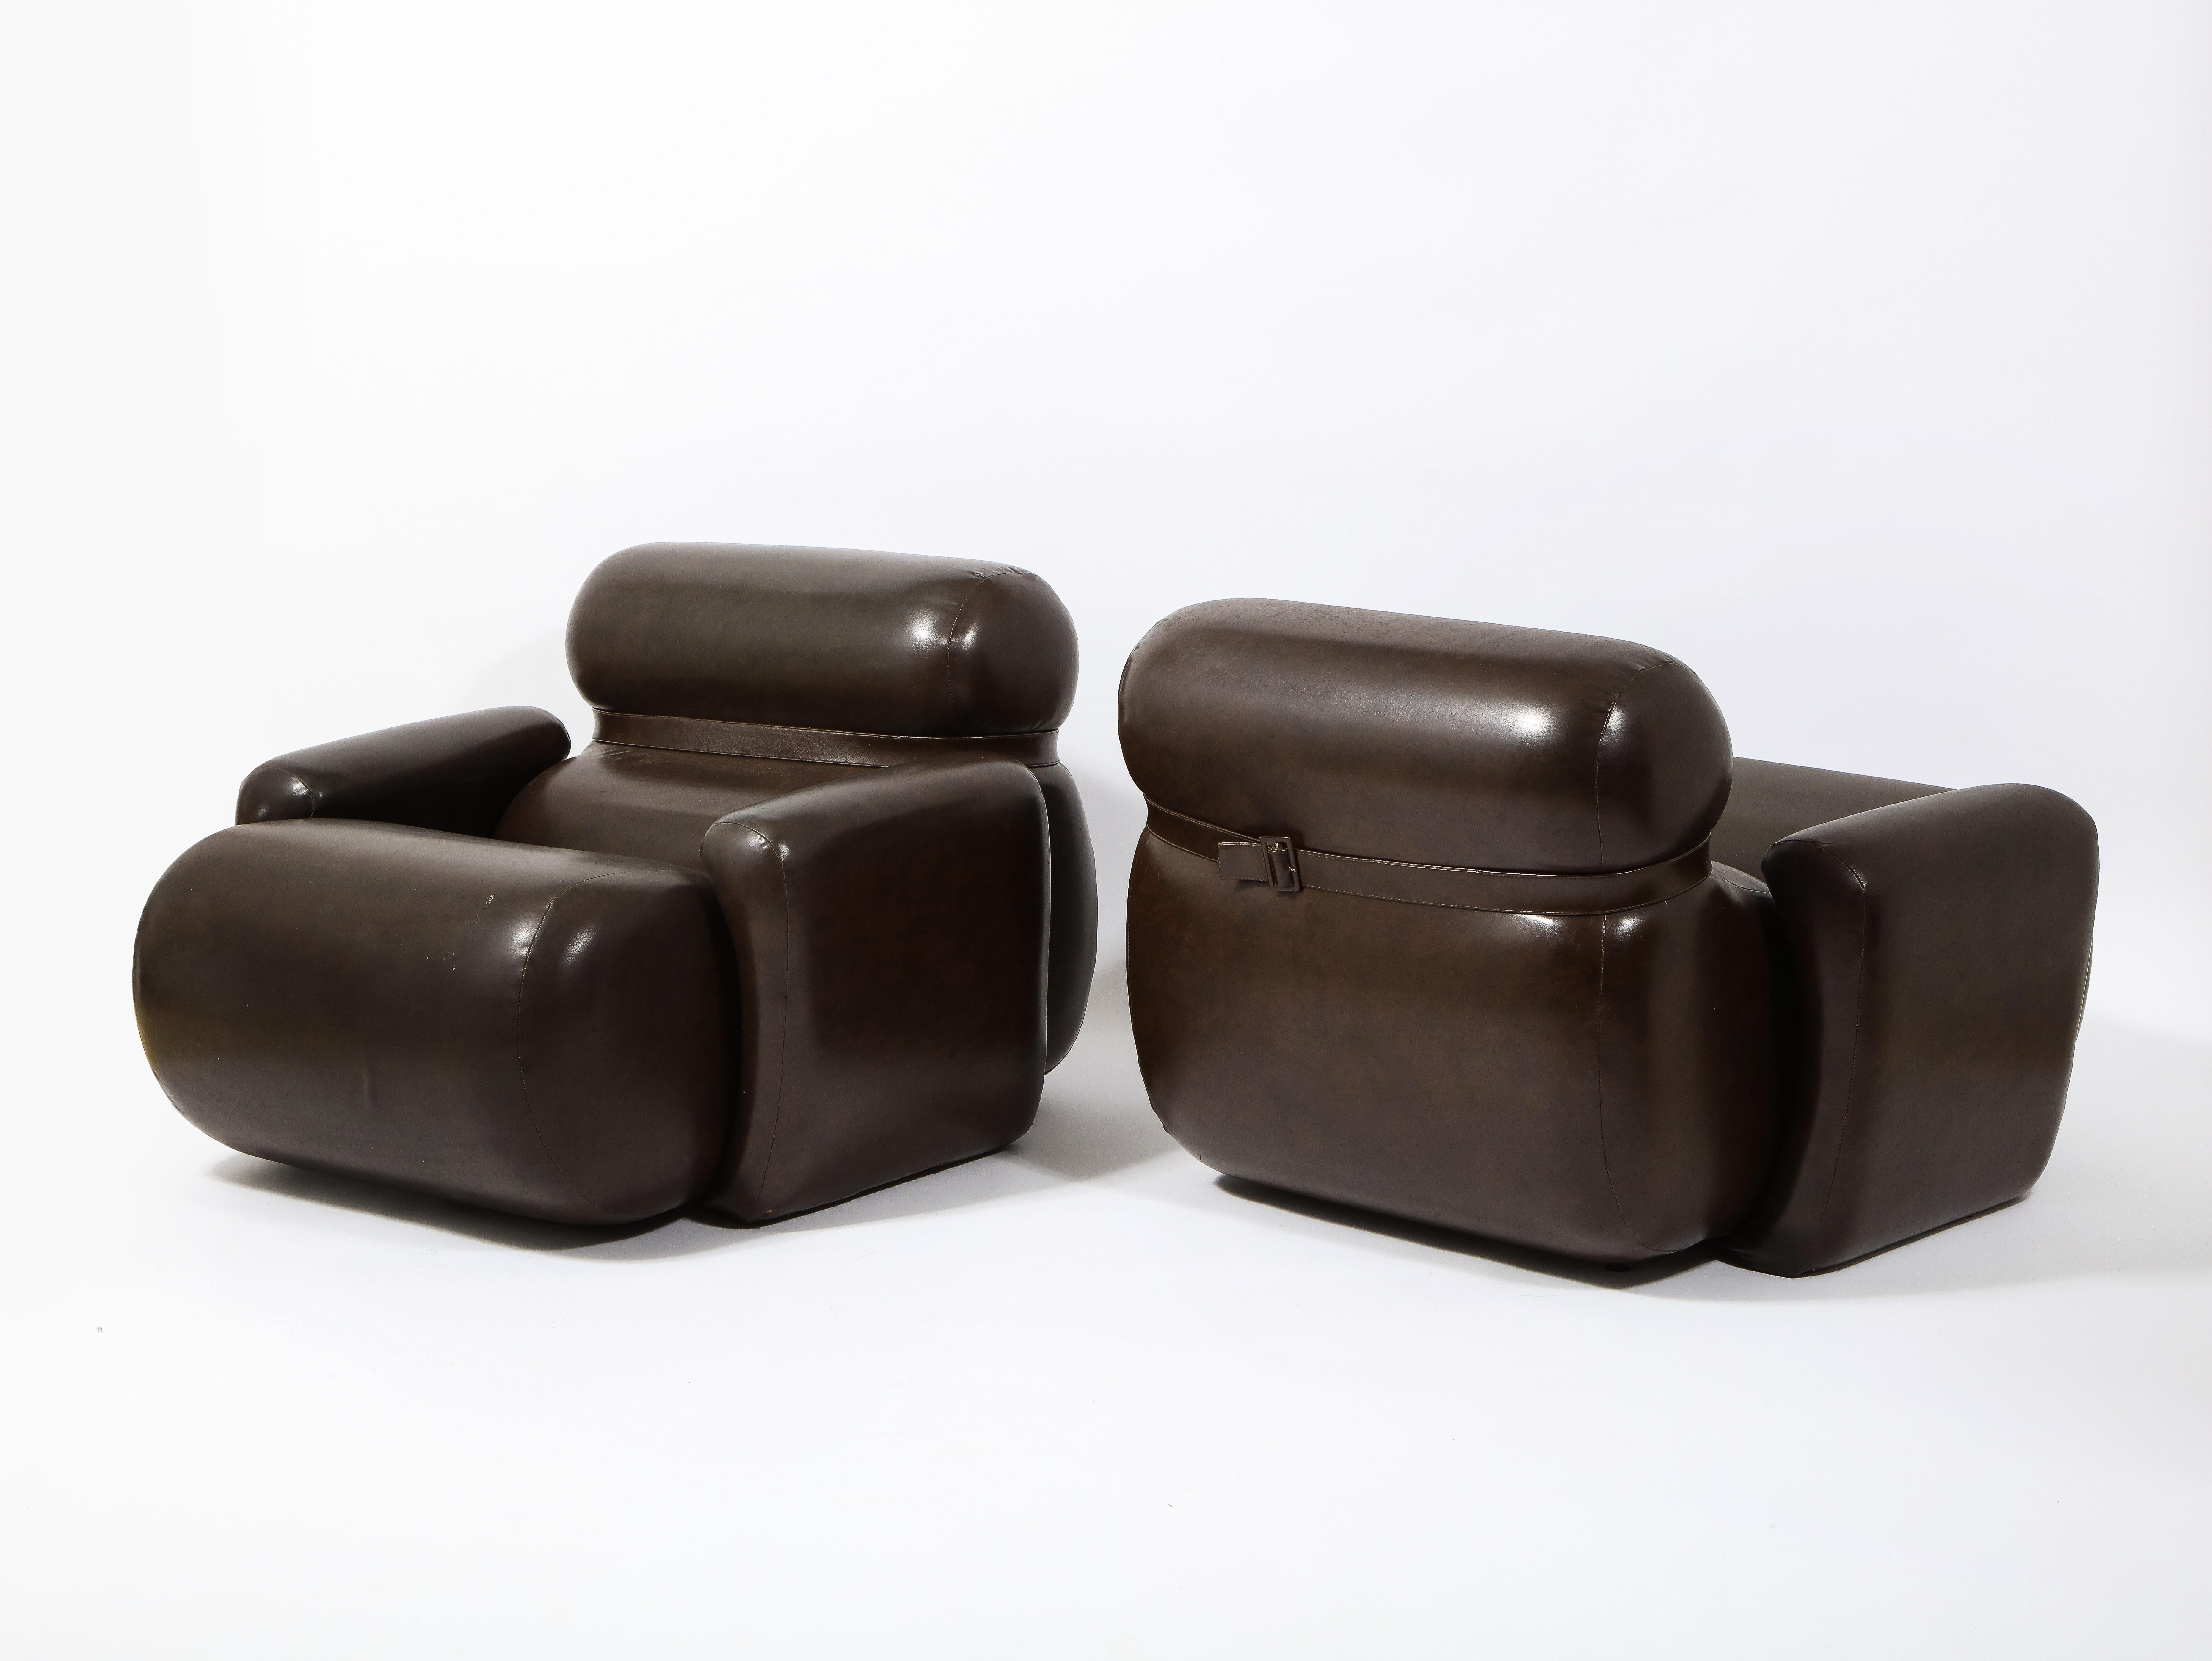 Large Space Age Lounge Chair Armchairs in Dark Brown Vinyl, France 1970's For Sale 4